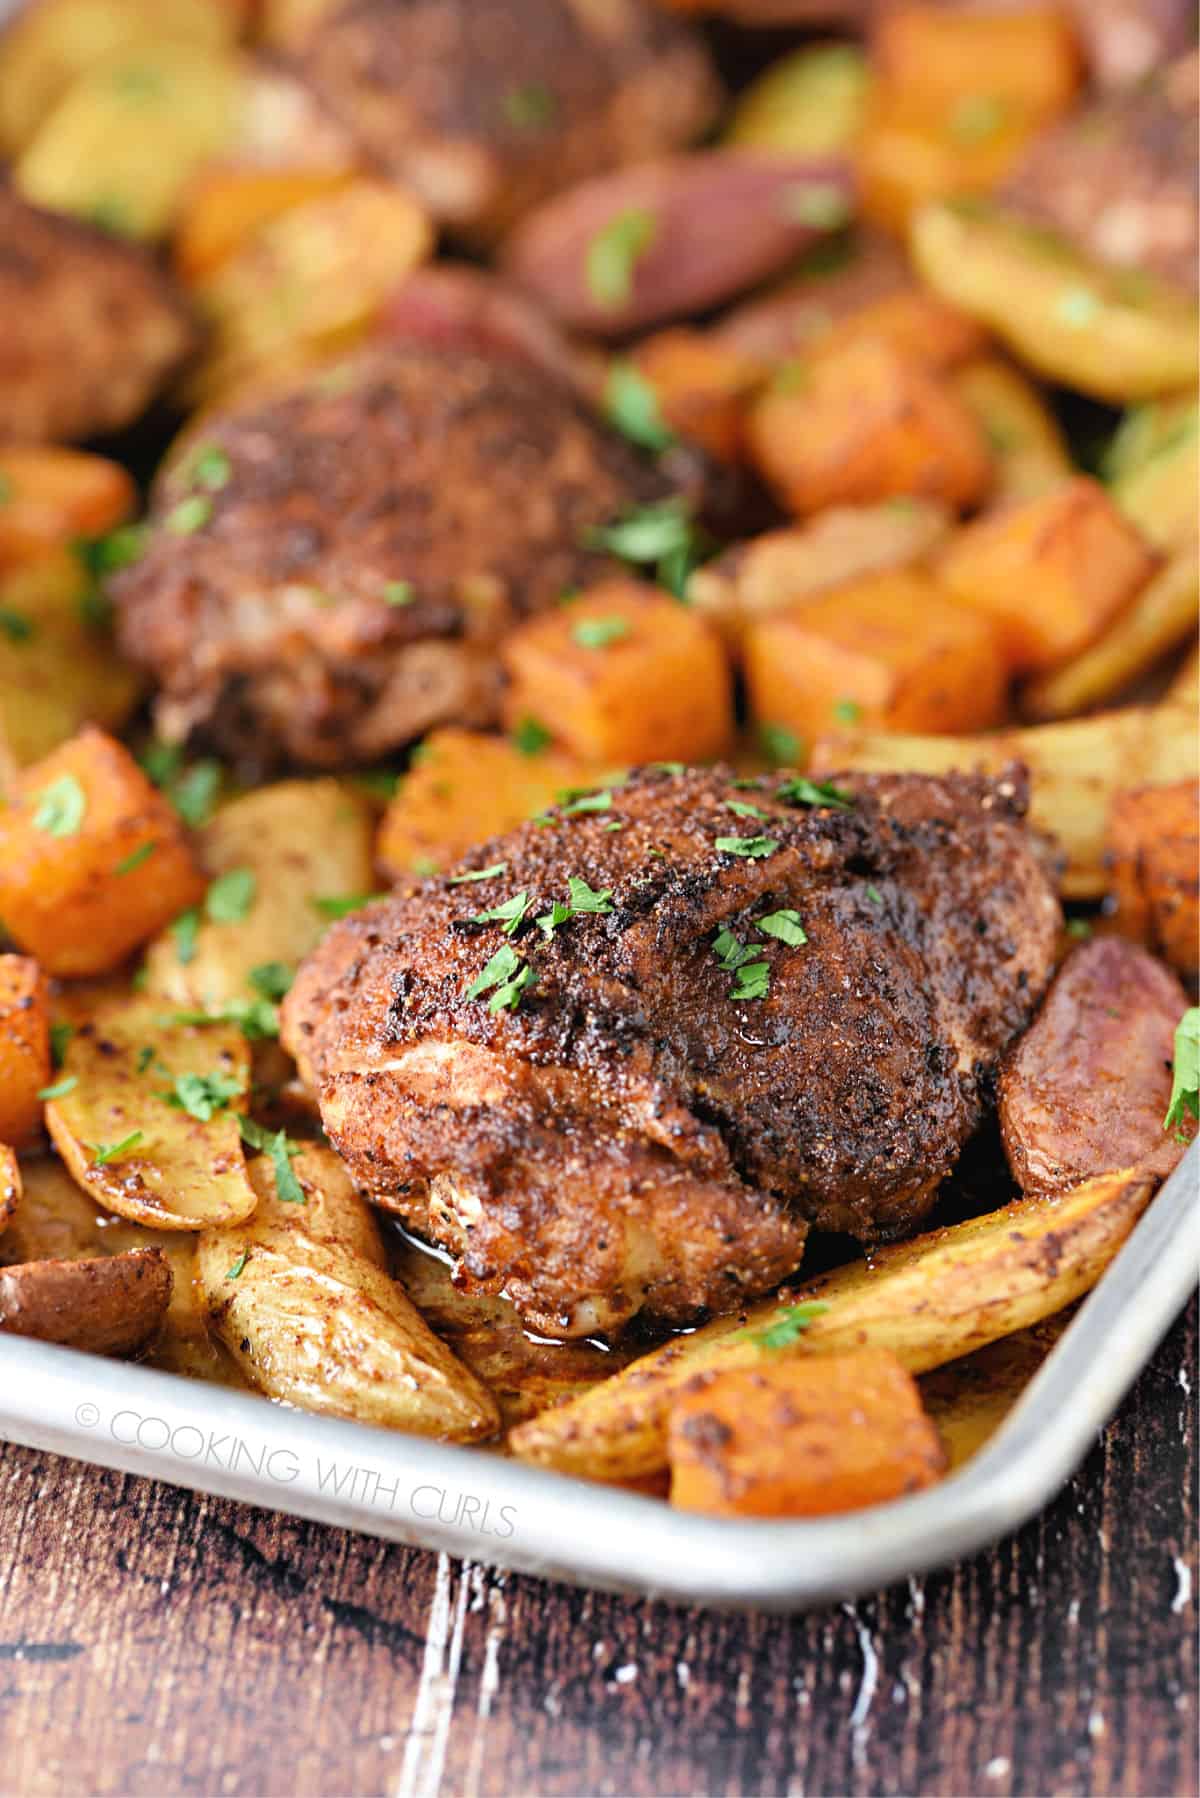 a close-up image of spice rubbed chicken thighs surrounded by roasted potatoes and butternut squash on a metal sheet pan.